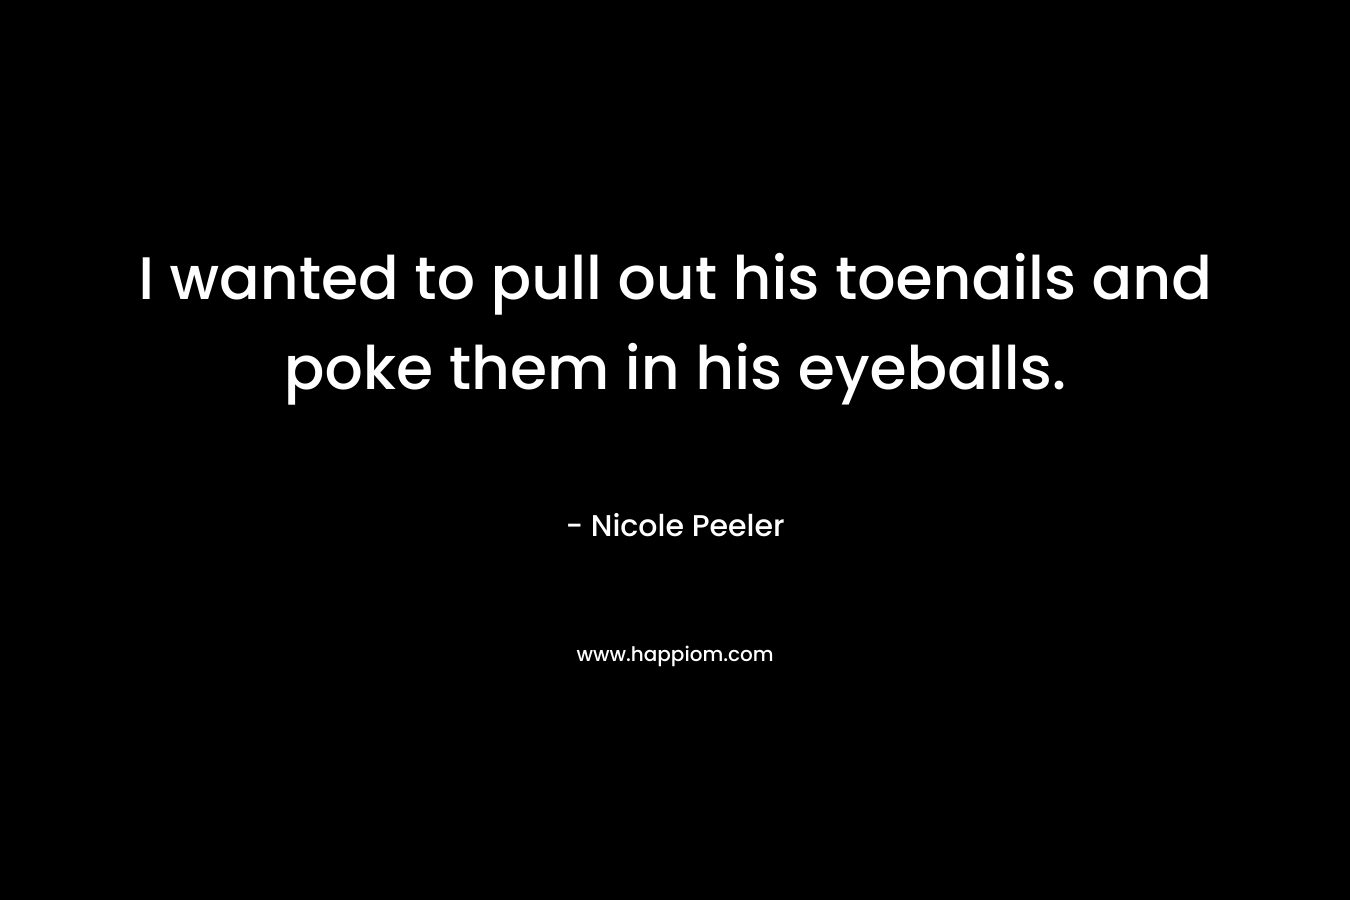 I wanted to pull out his toenails and poke them in his eyeballs. – Nicole Peeler